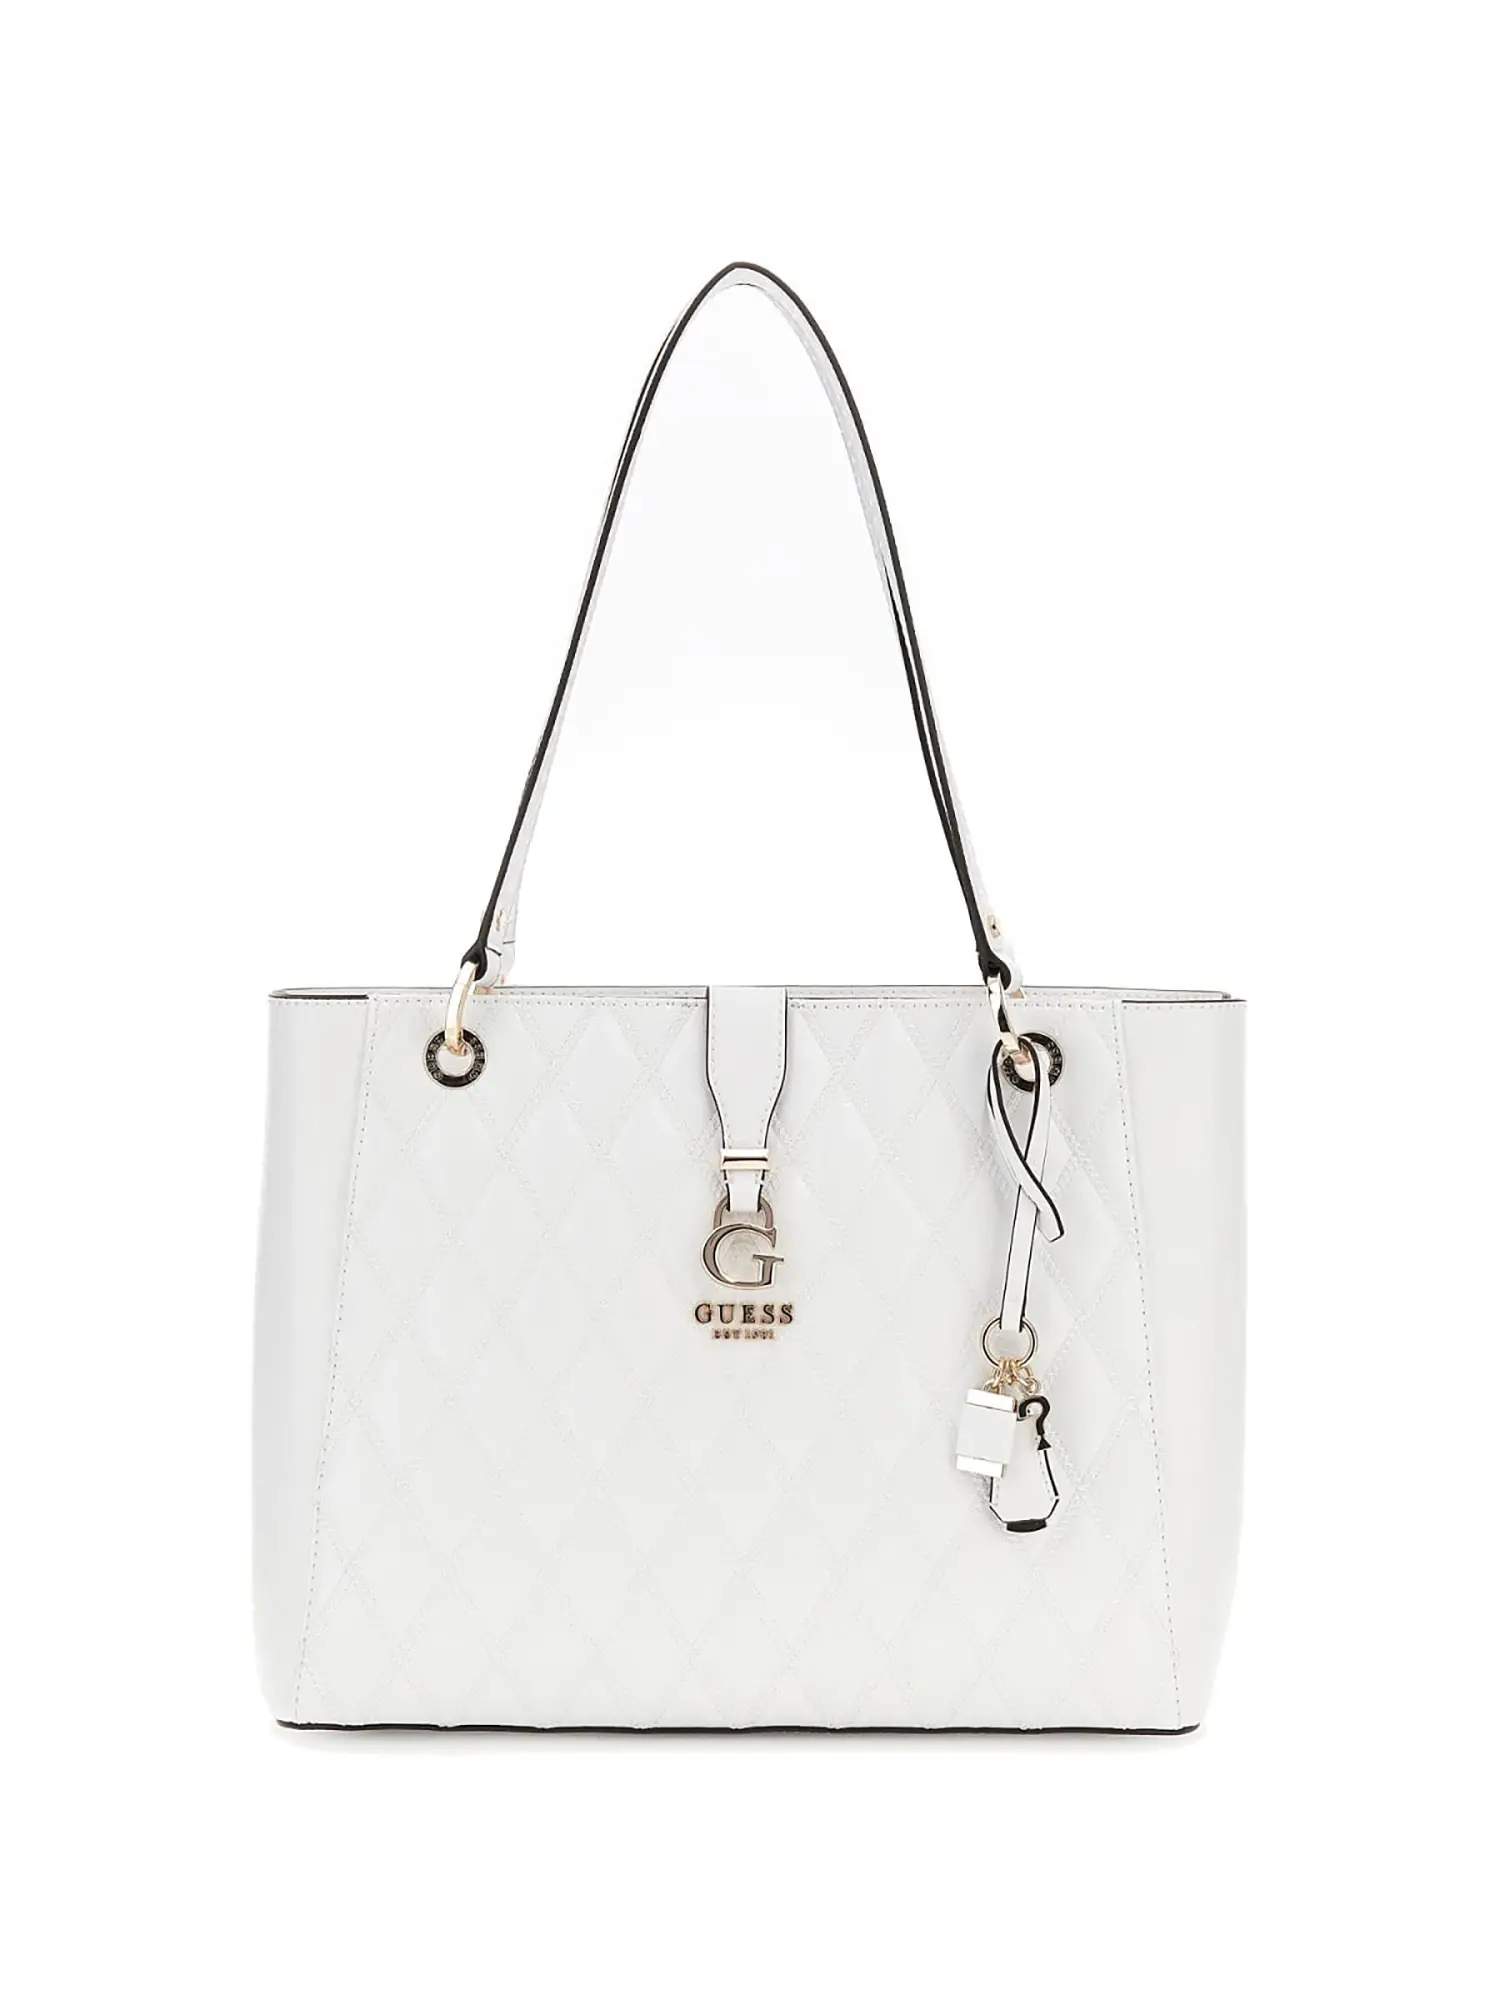 TOTE DONNA - GUESS - HWGG93 06250 - BIANCO, UNICA